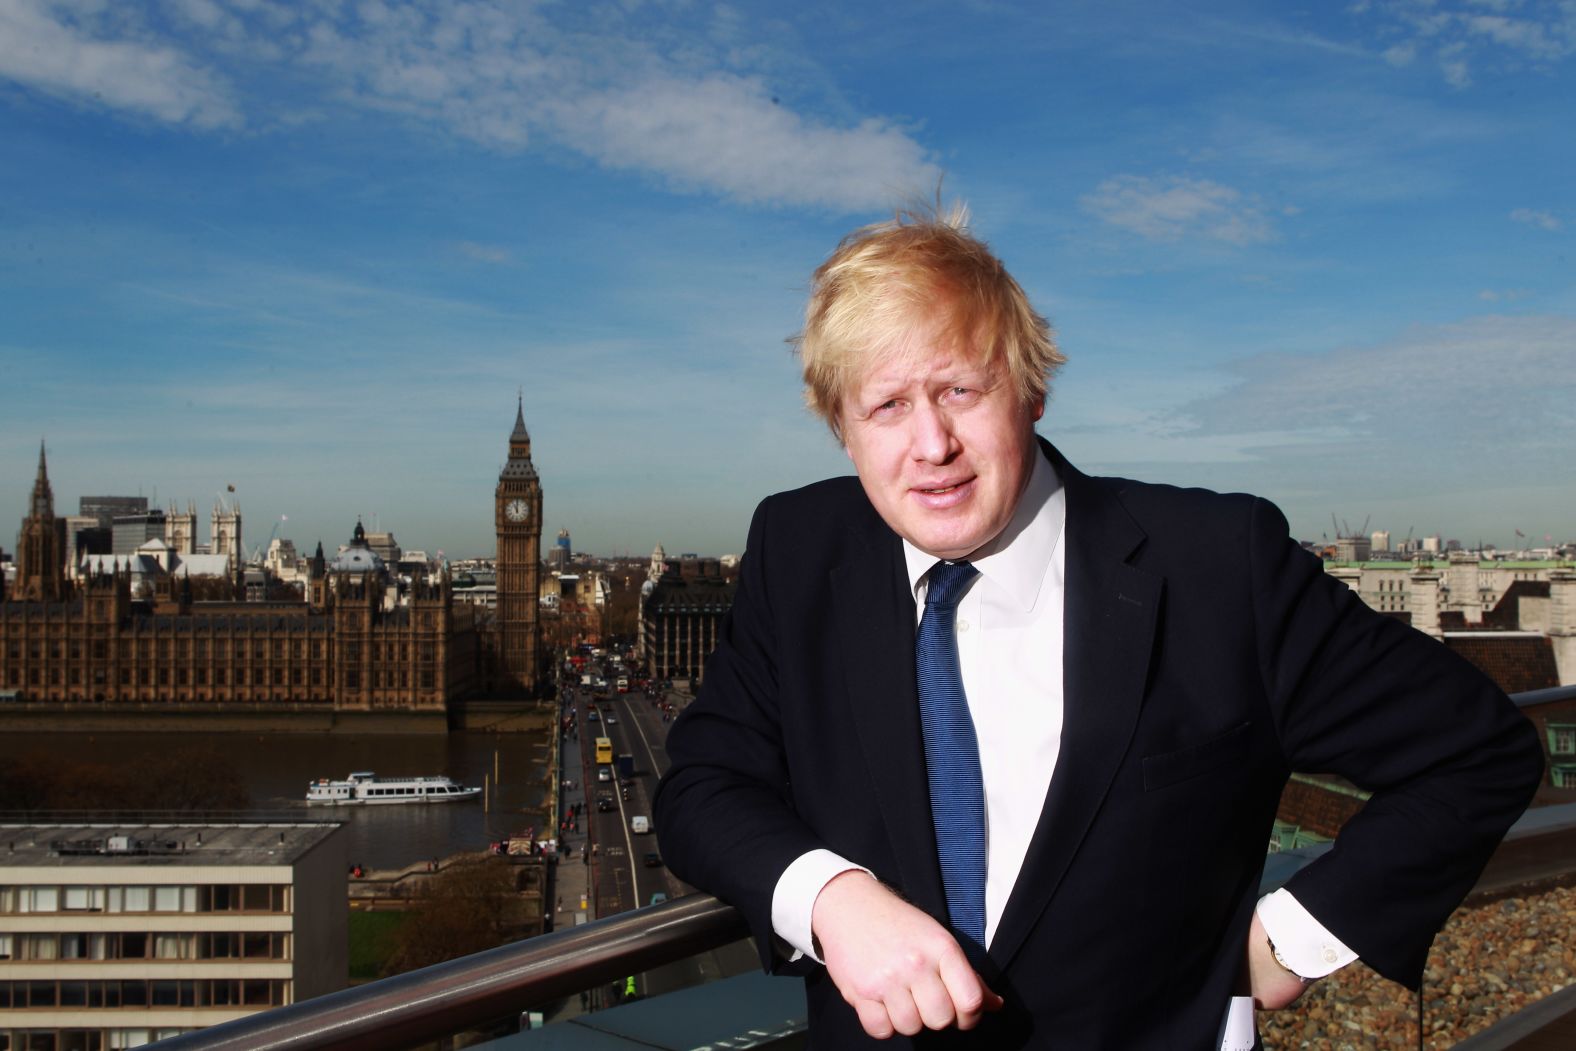 Johnson poses for a photo in London in April 2011. He was re-elected as the city's mayor in 2012.